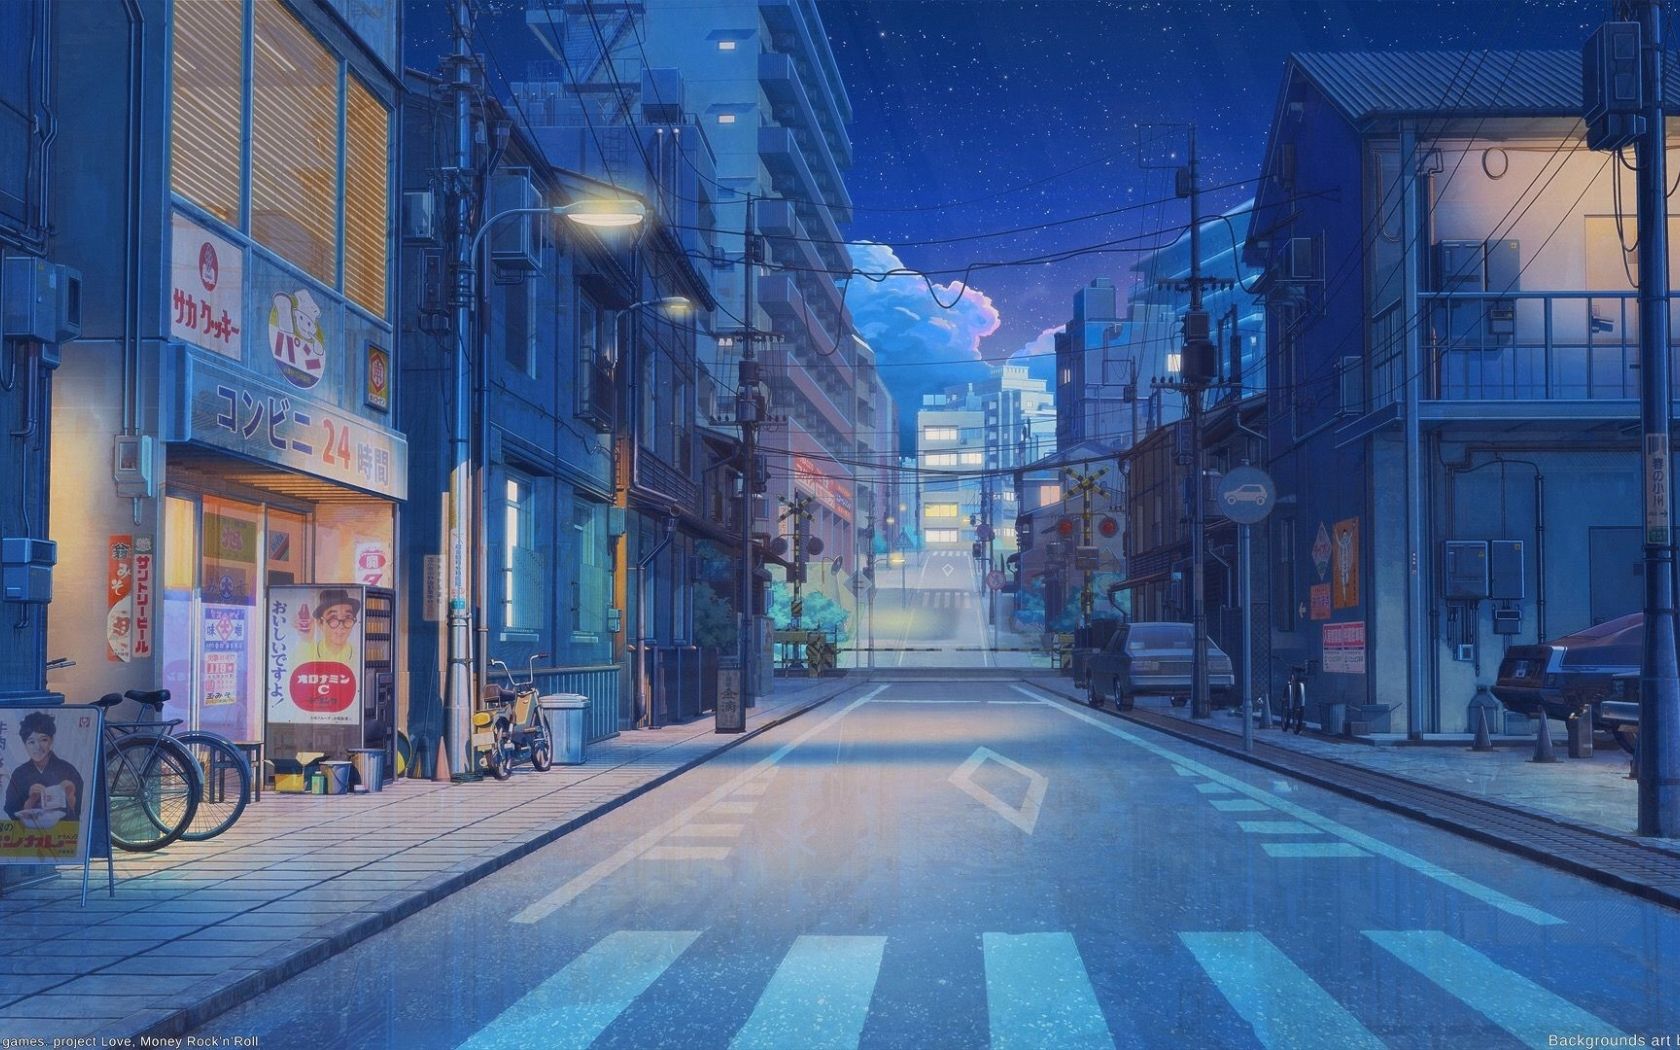 Free download Anime Aesthetic Wallpaper - in Collection